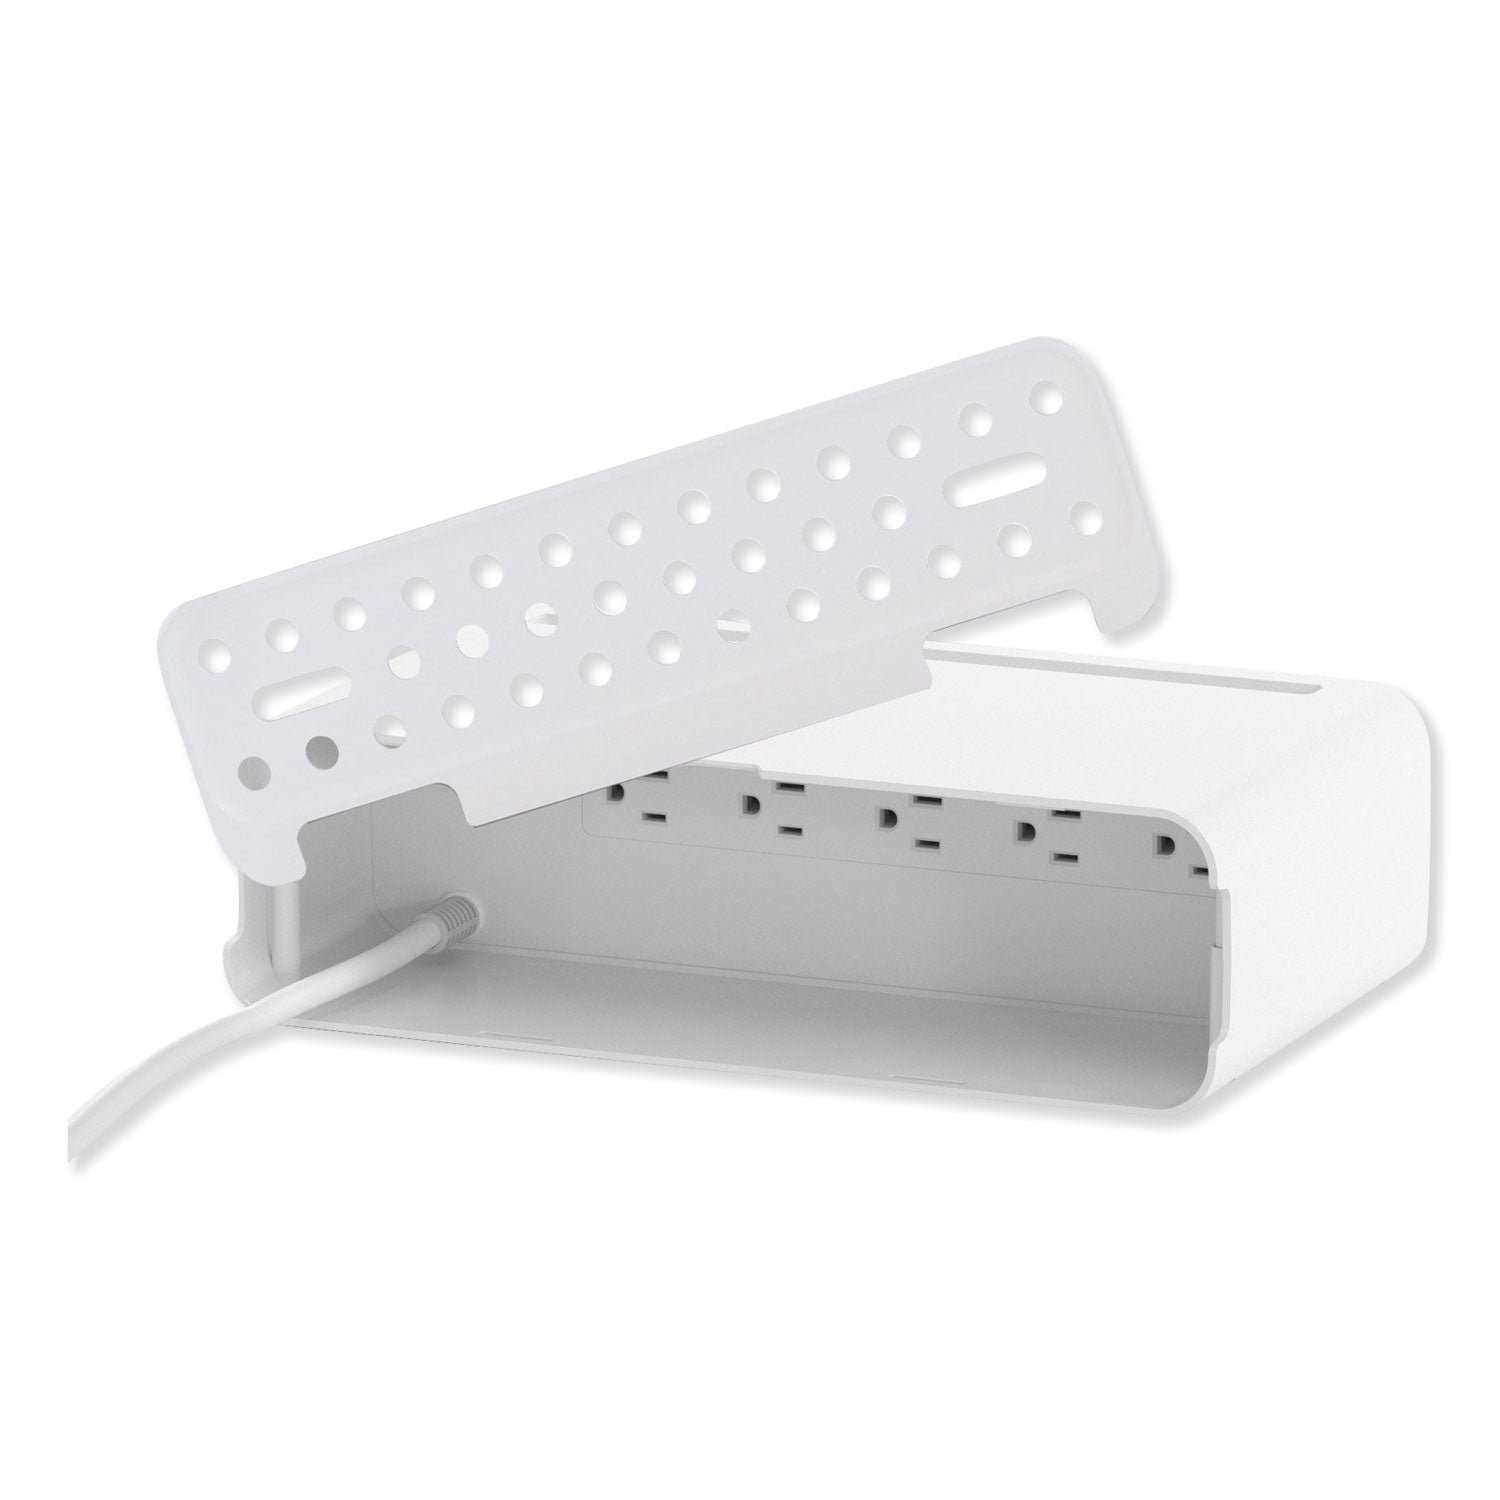 cable-management-power-hub-and-stand-with-usb-charging-ports-5-outlets-3-usb-65-ft-cord-white_ktkcm1100 - 3